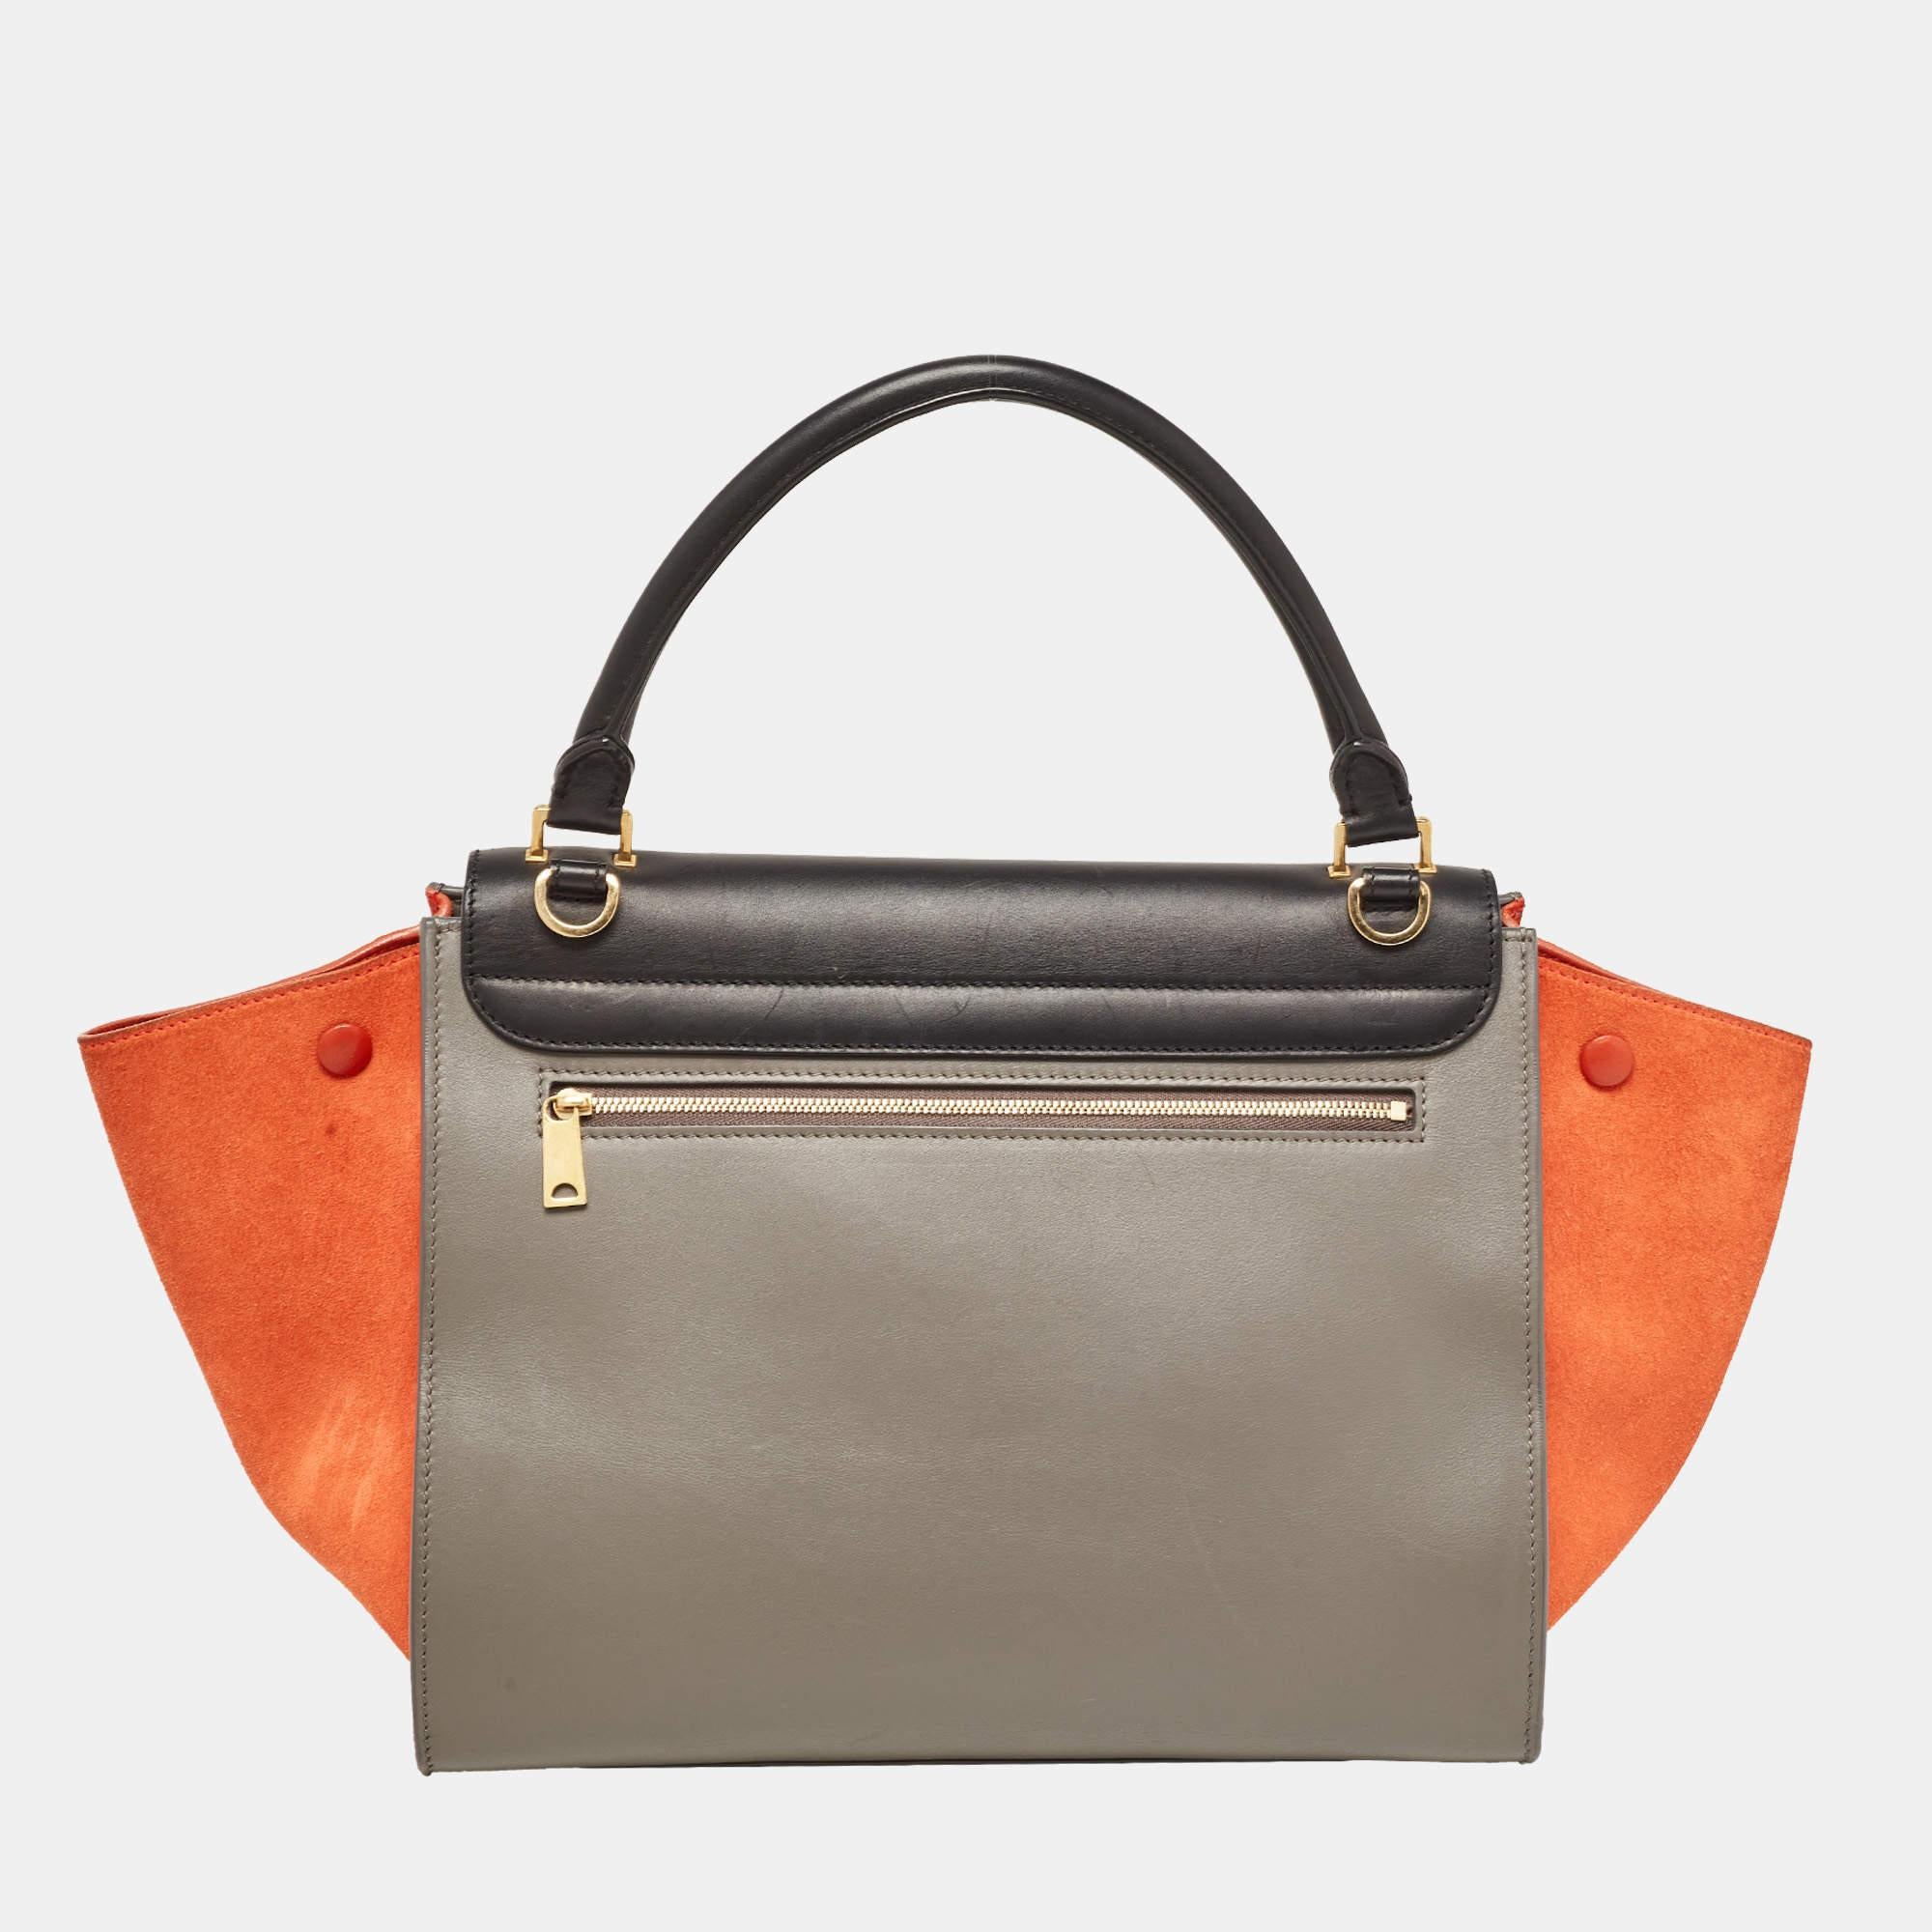 Designer bags are ideal companions for ample occasions! Here we have a fashion-meets-functionality piece crafted with precision. It has been equipped with a well-sized interior that can easily fit all your essentials.

Includes: Original Dustbag,